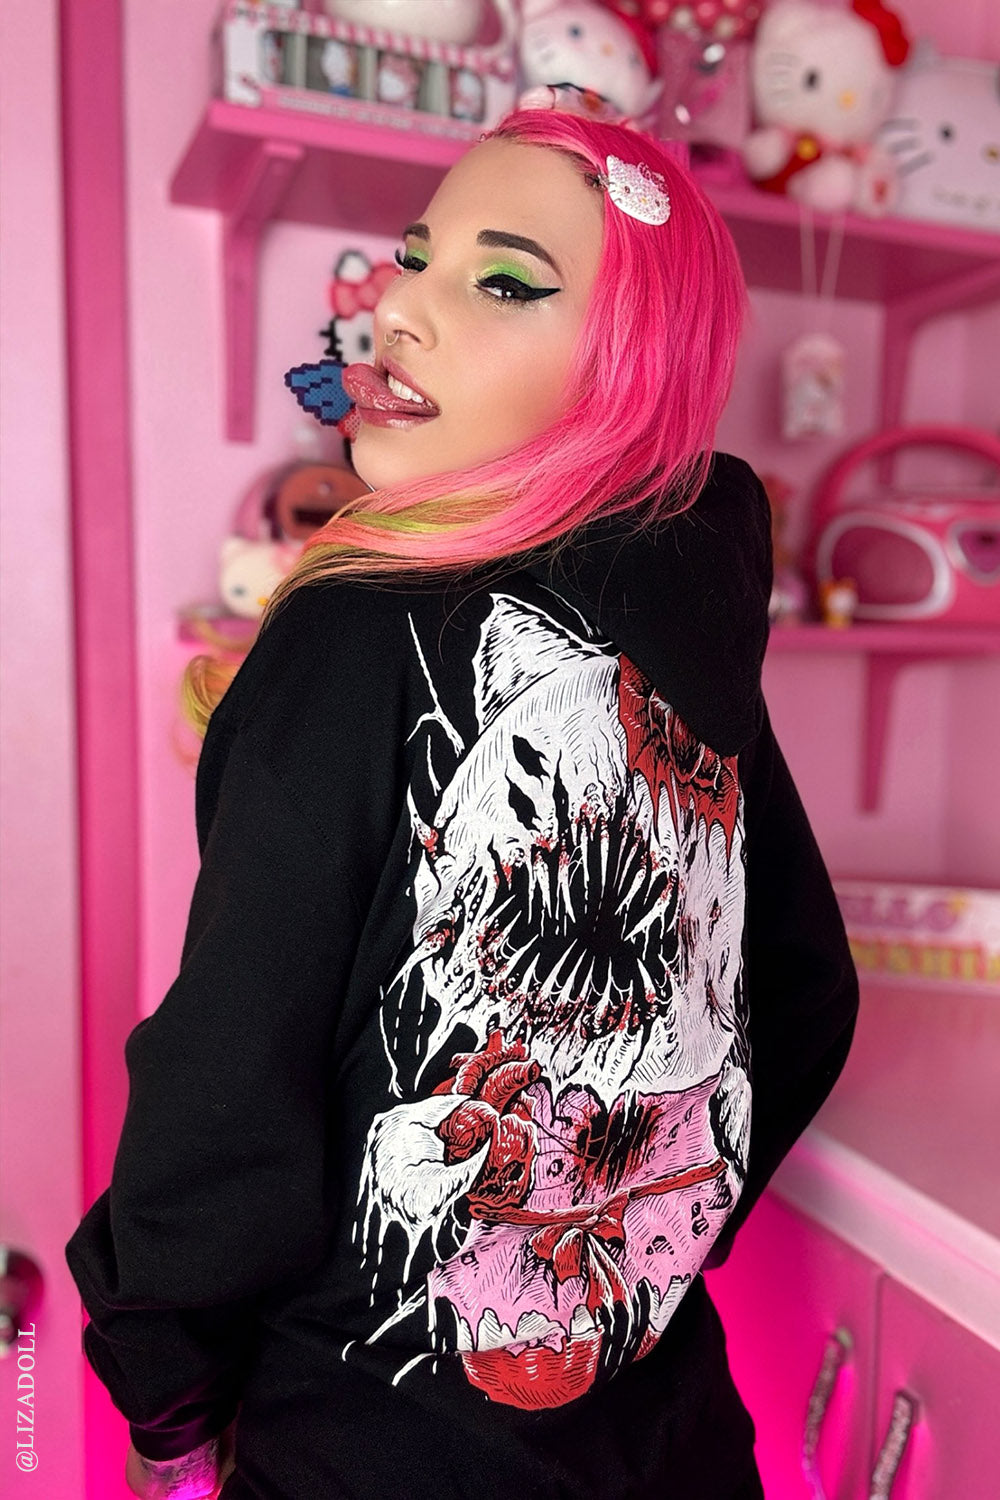 Hell Kitty Hoodie [Zipper or Pullover]